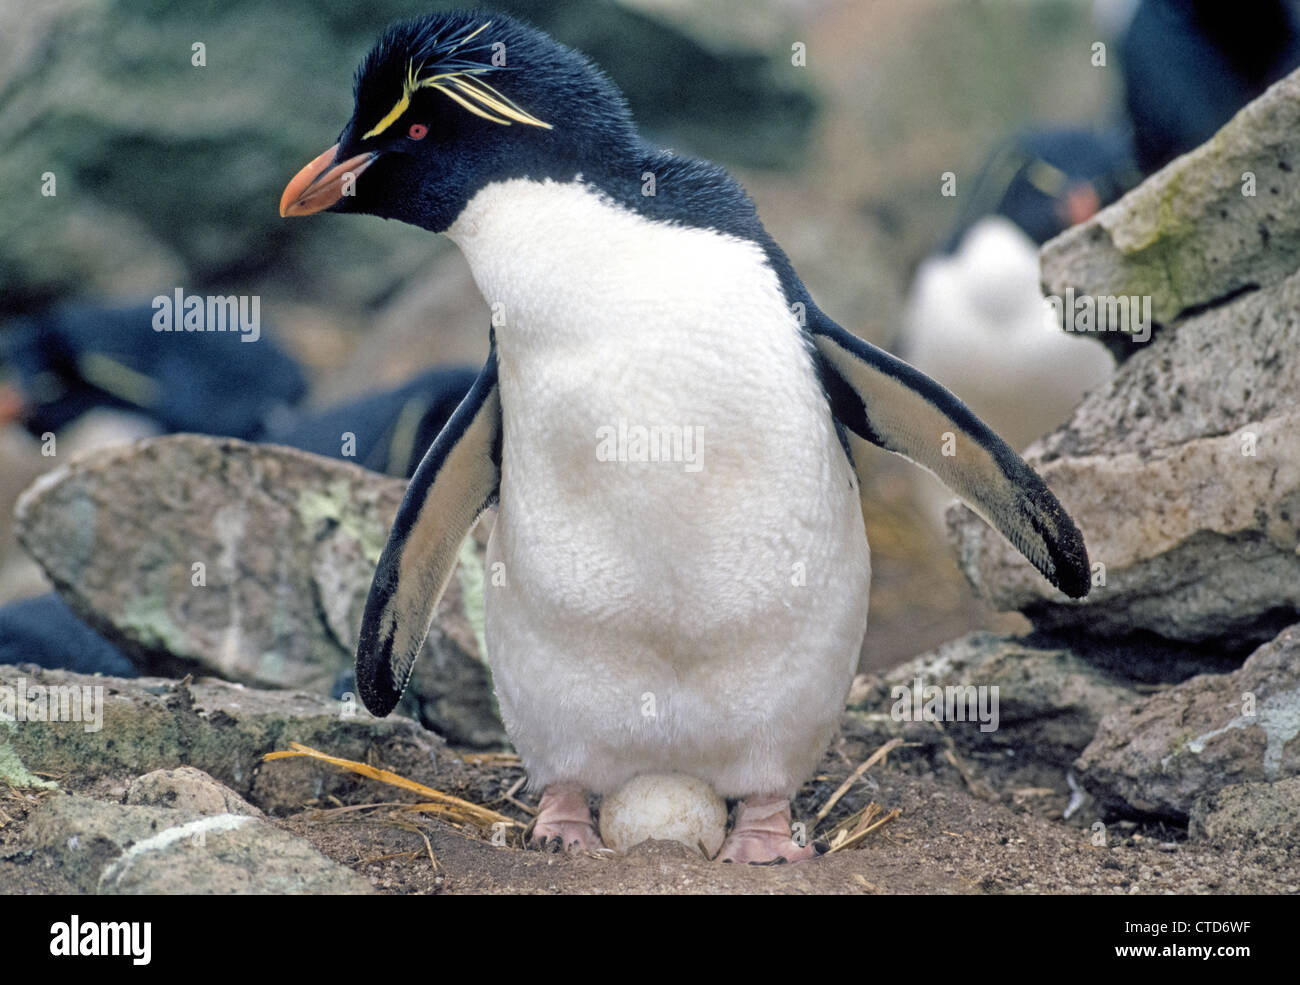 A Southern Rockhopper Penguin sits on an egg in a nest in the Falkland Islands in the South Atlantic Ocean near South America. Stock Photo